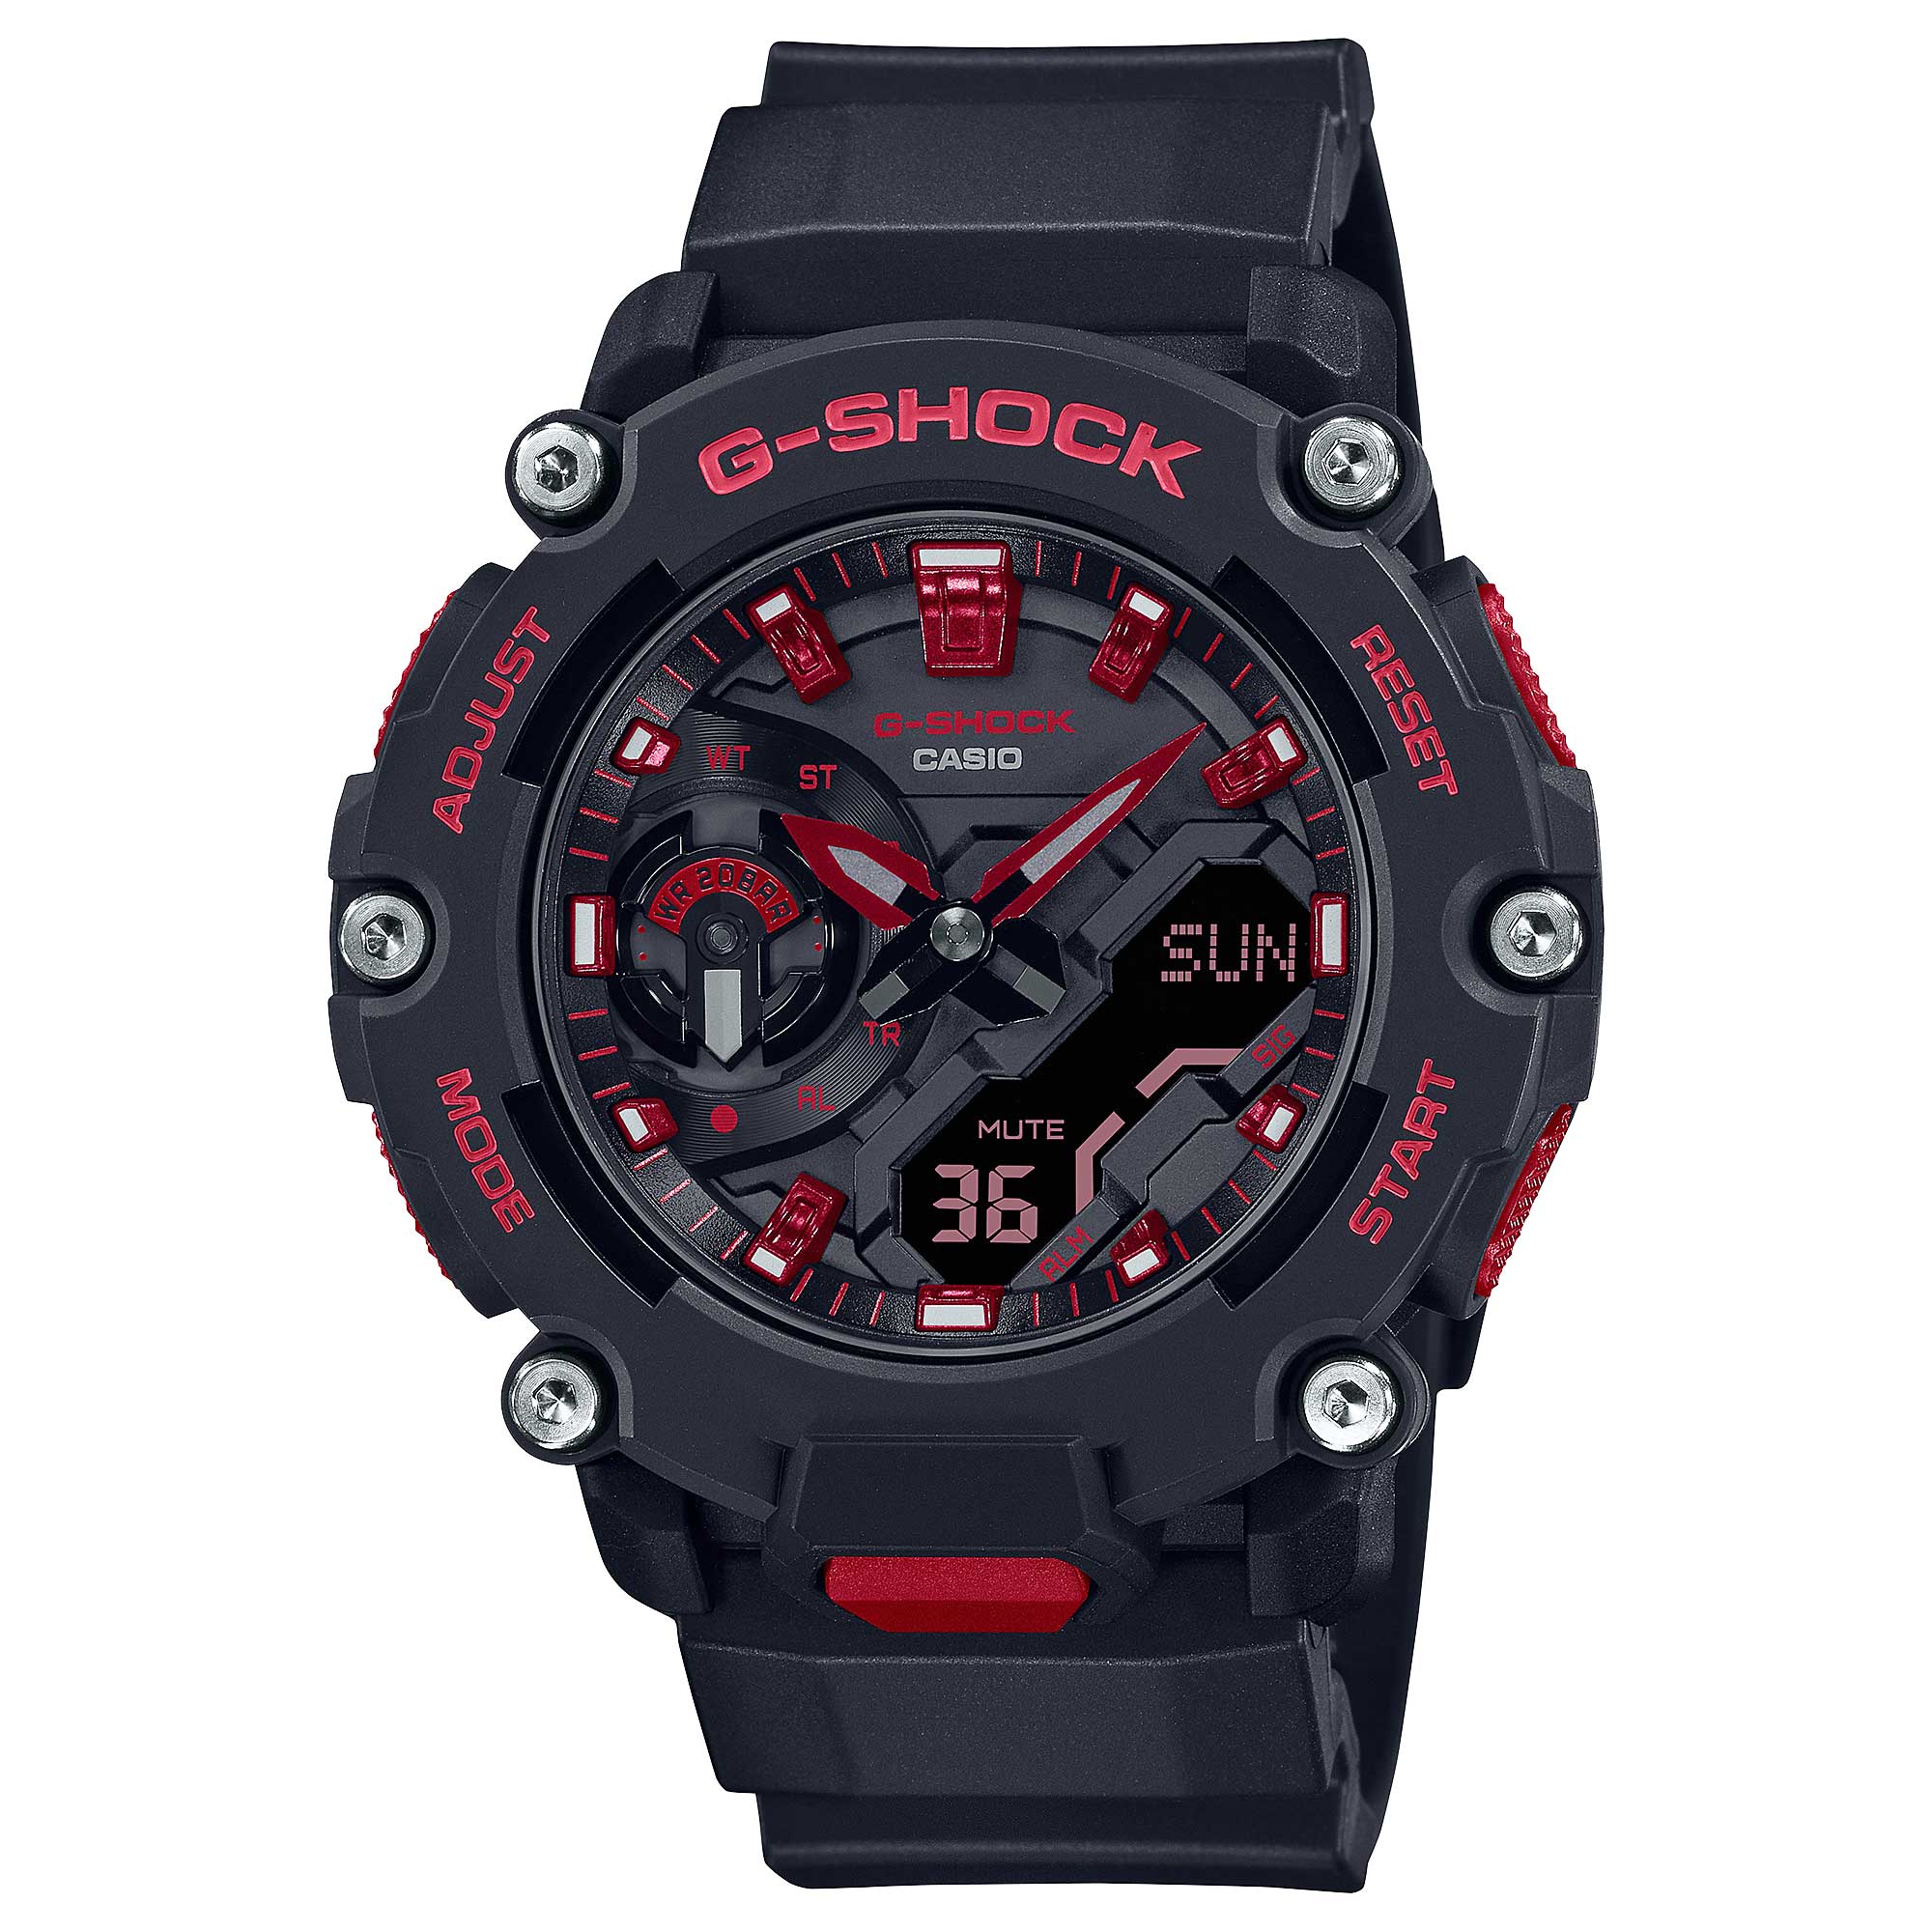 Casio G-Shock Carbon Core Guard Structure Black and Fiery Red Series Black Resin Band Watch GA2200BNR-1A GA-2200BNR-1A Watchspree